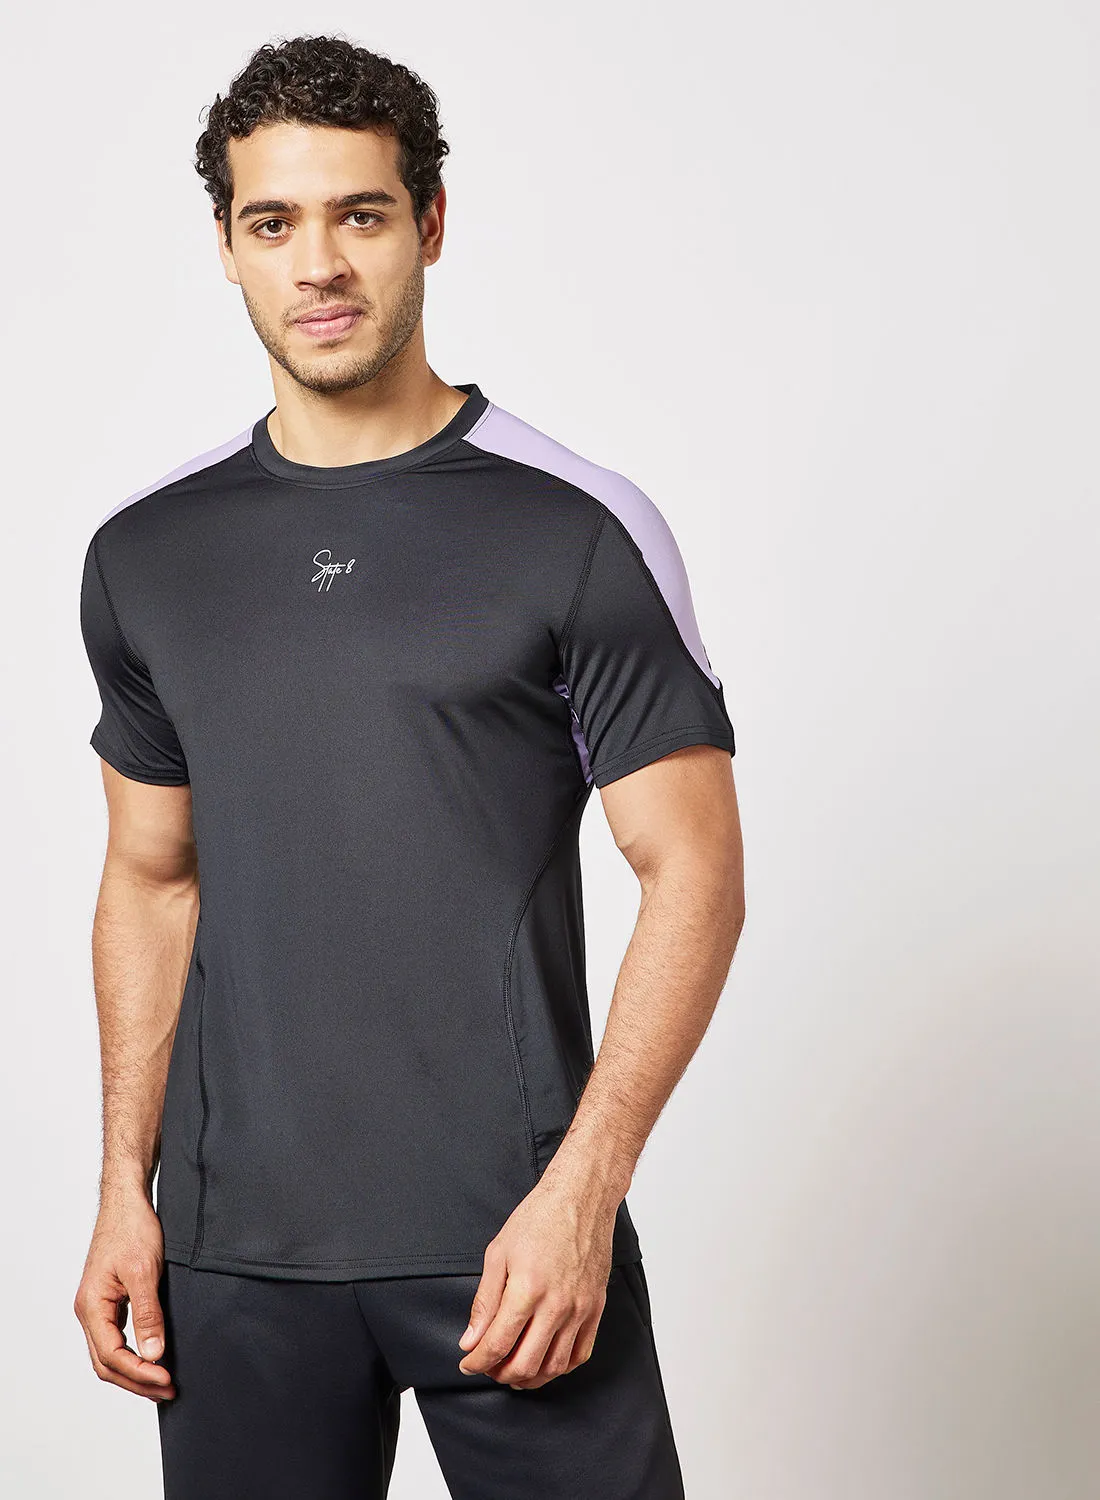 STATE 8 Active Sports Panel T-Shirt أسود / أرجواني